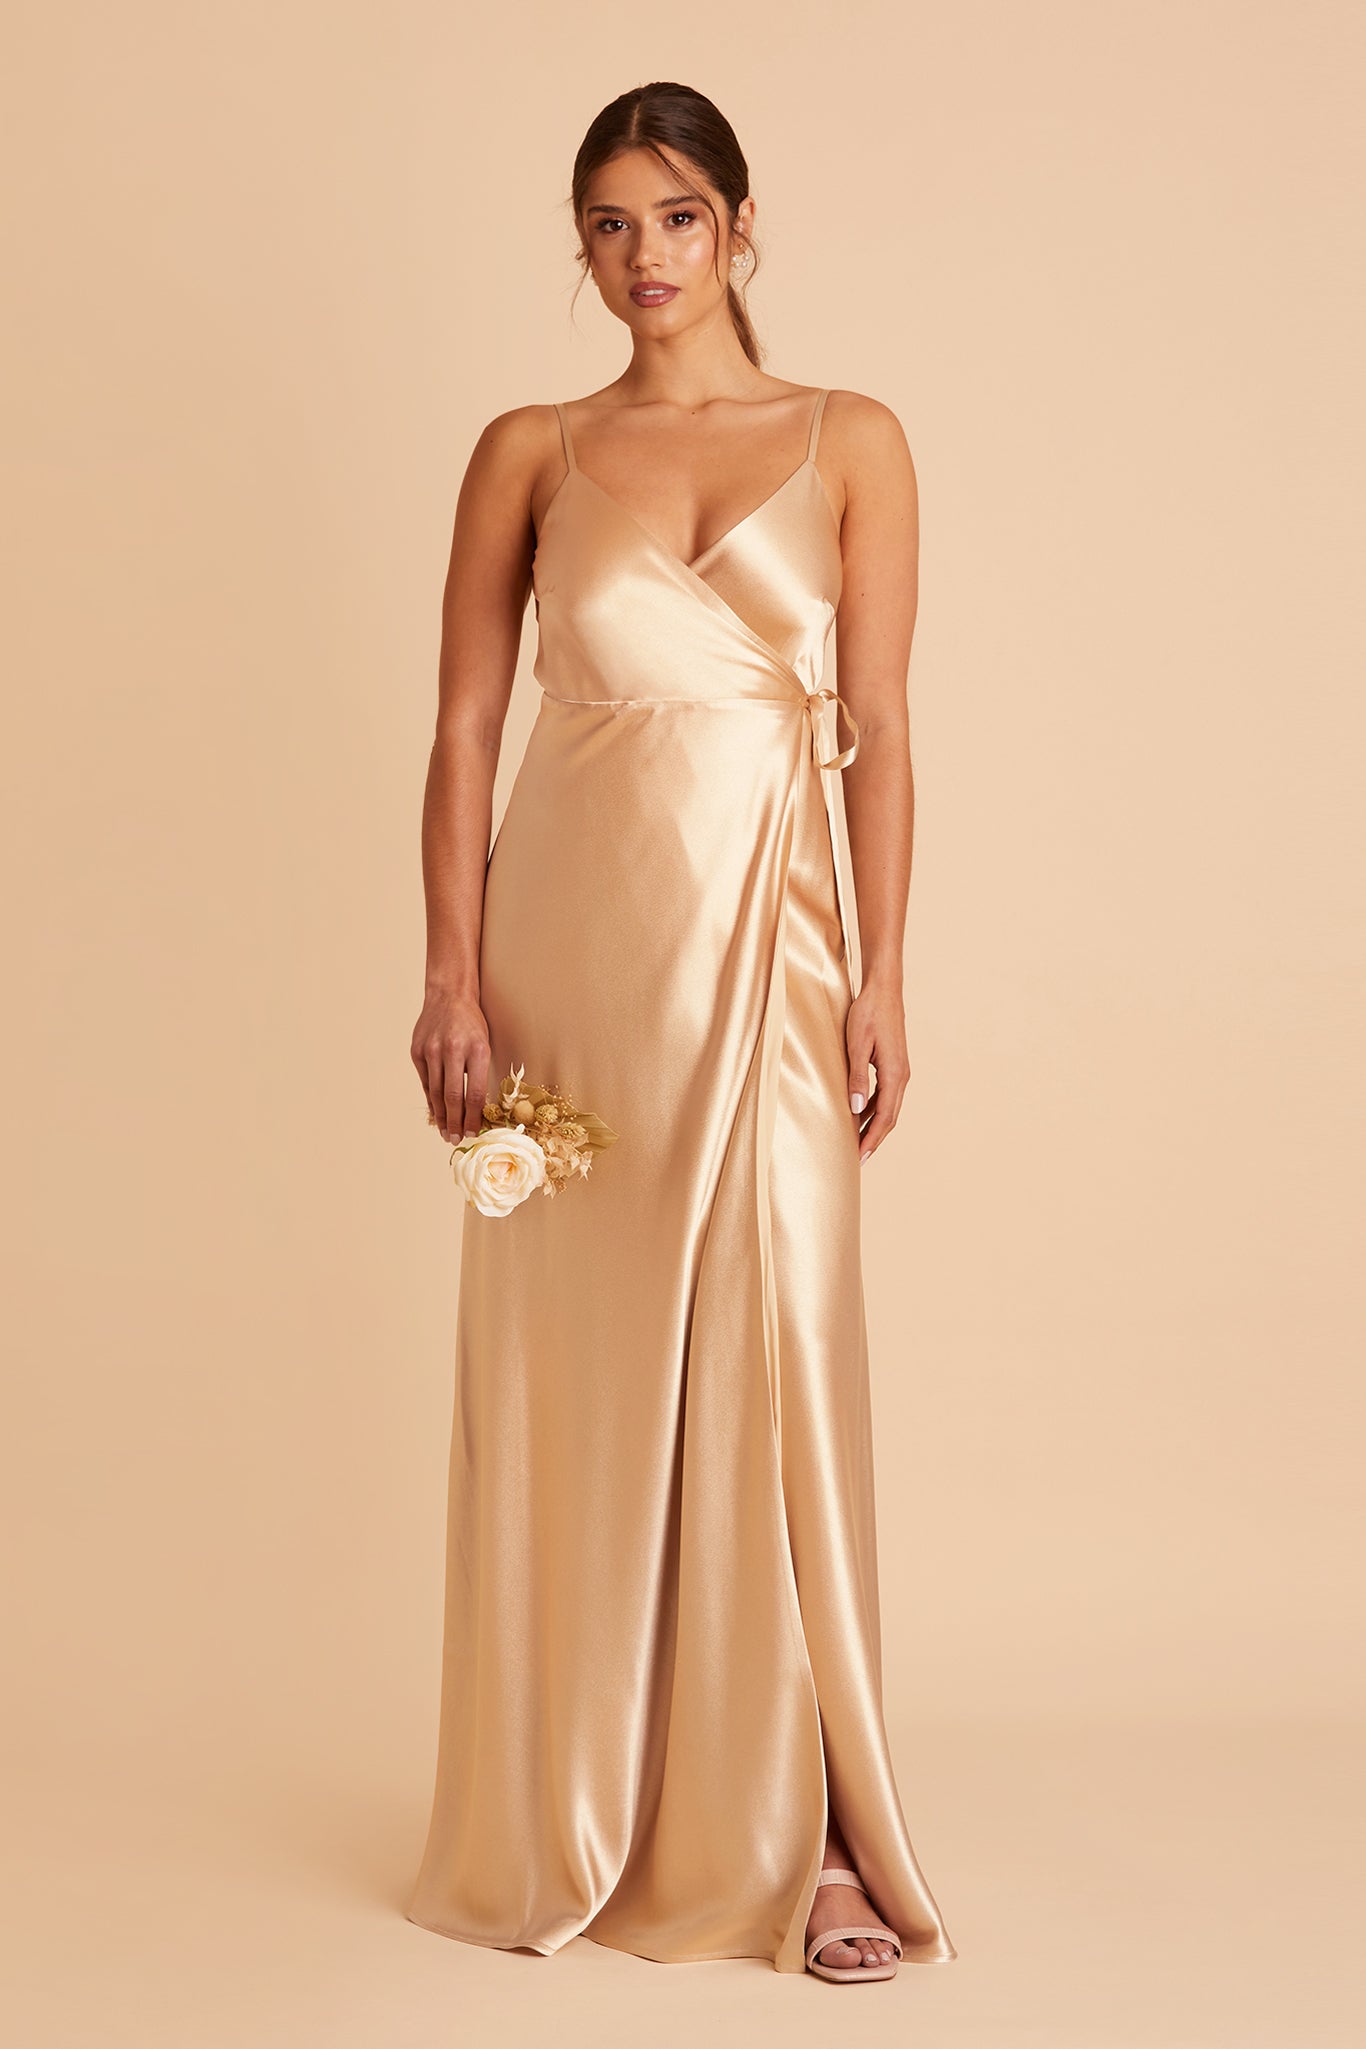 Cindy Satin Dress in gold satin by Birdy Grey, front view